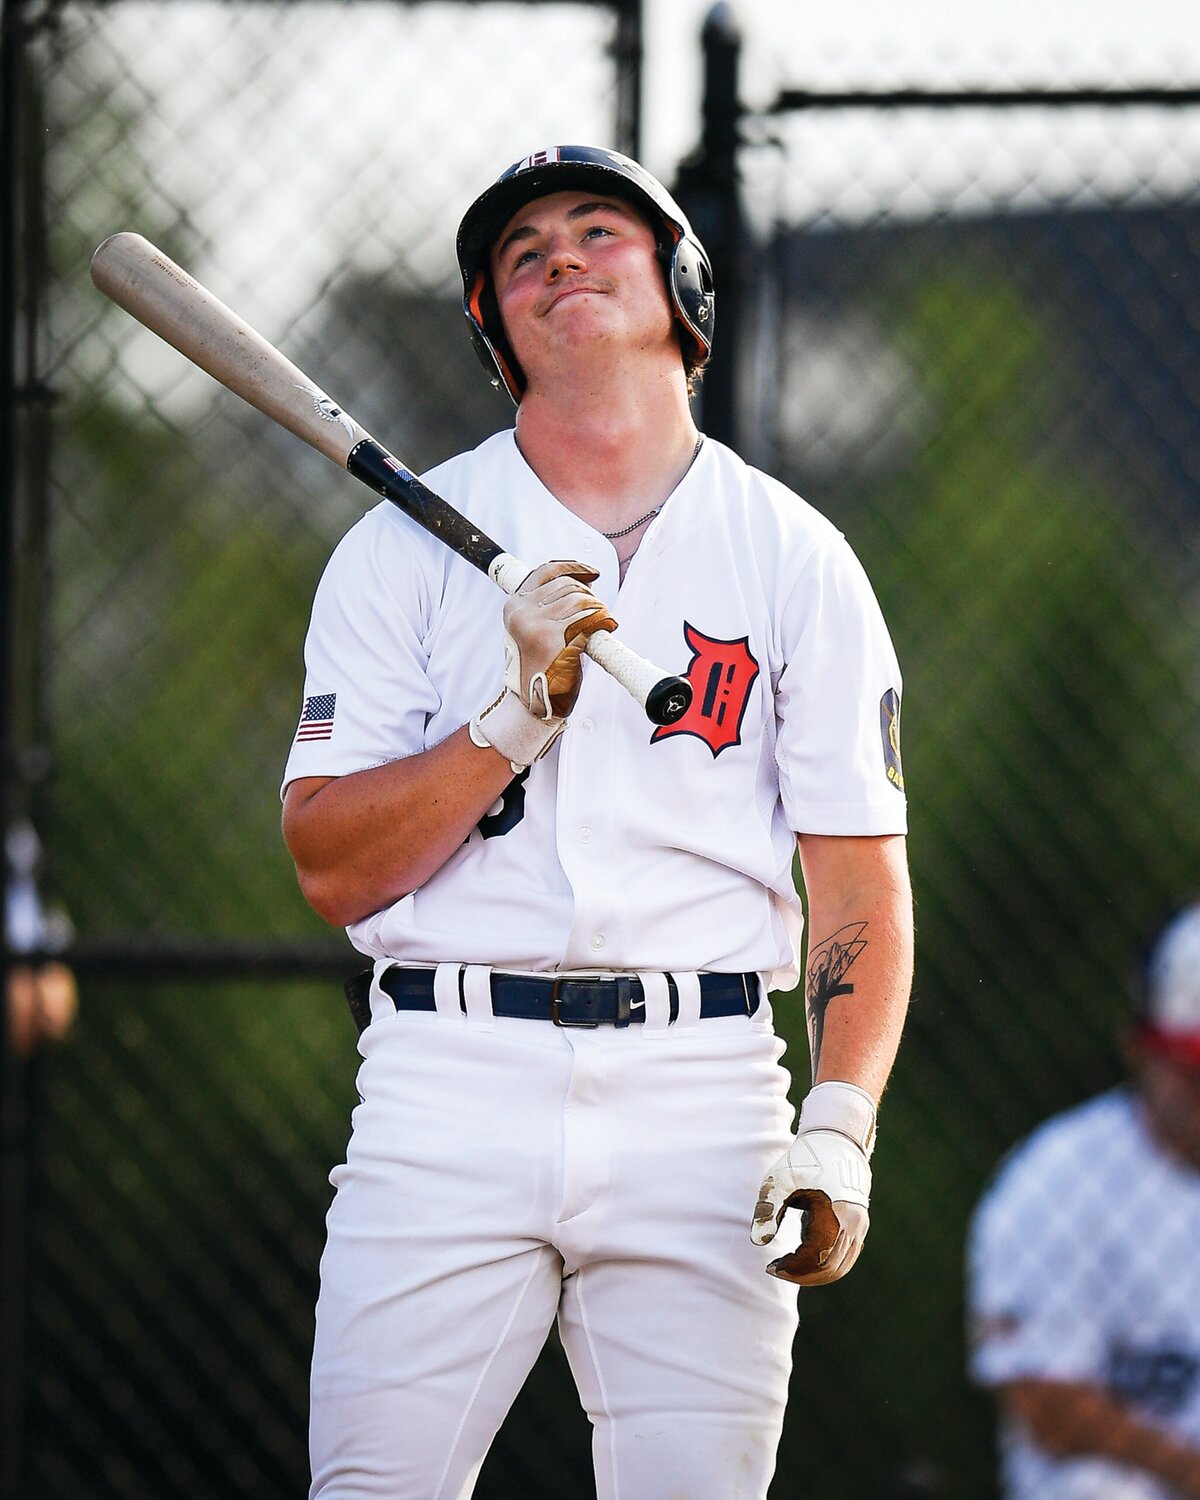 Doylestown’s Jackson Mott can only smile after a close pitch was called a strike in the first inning.